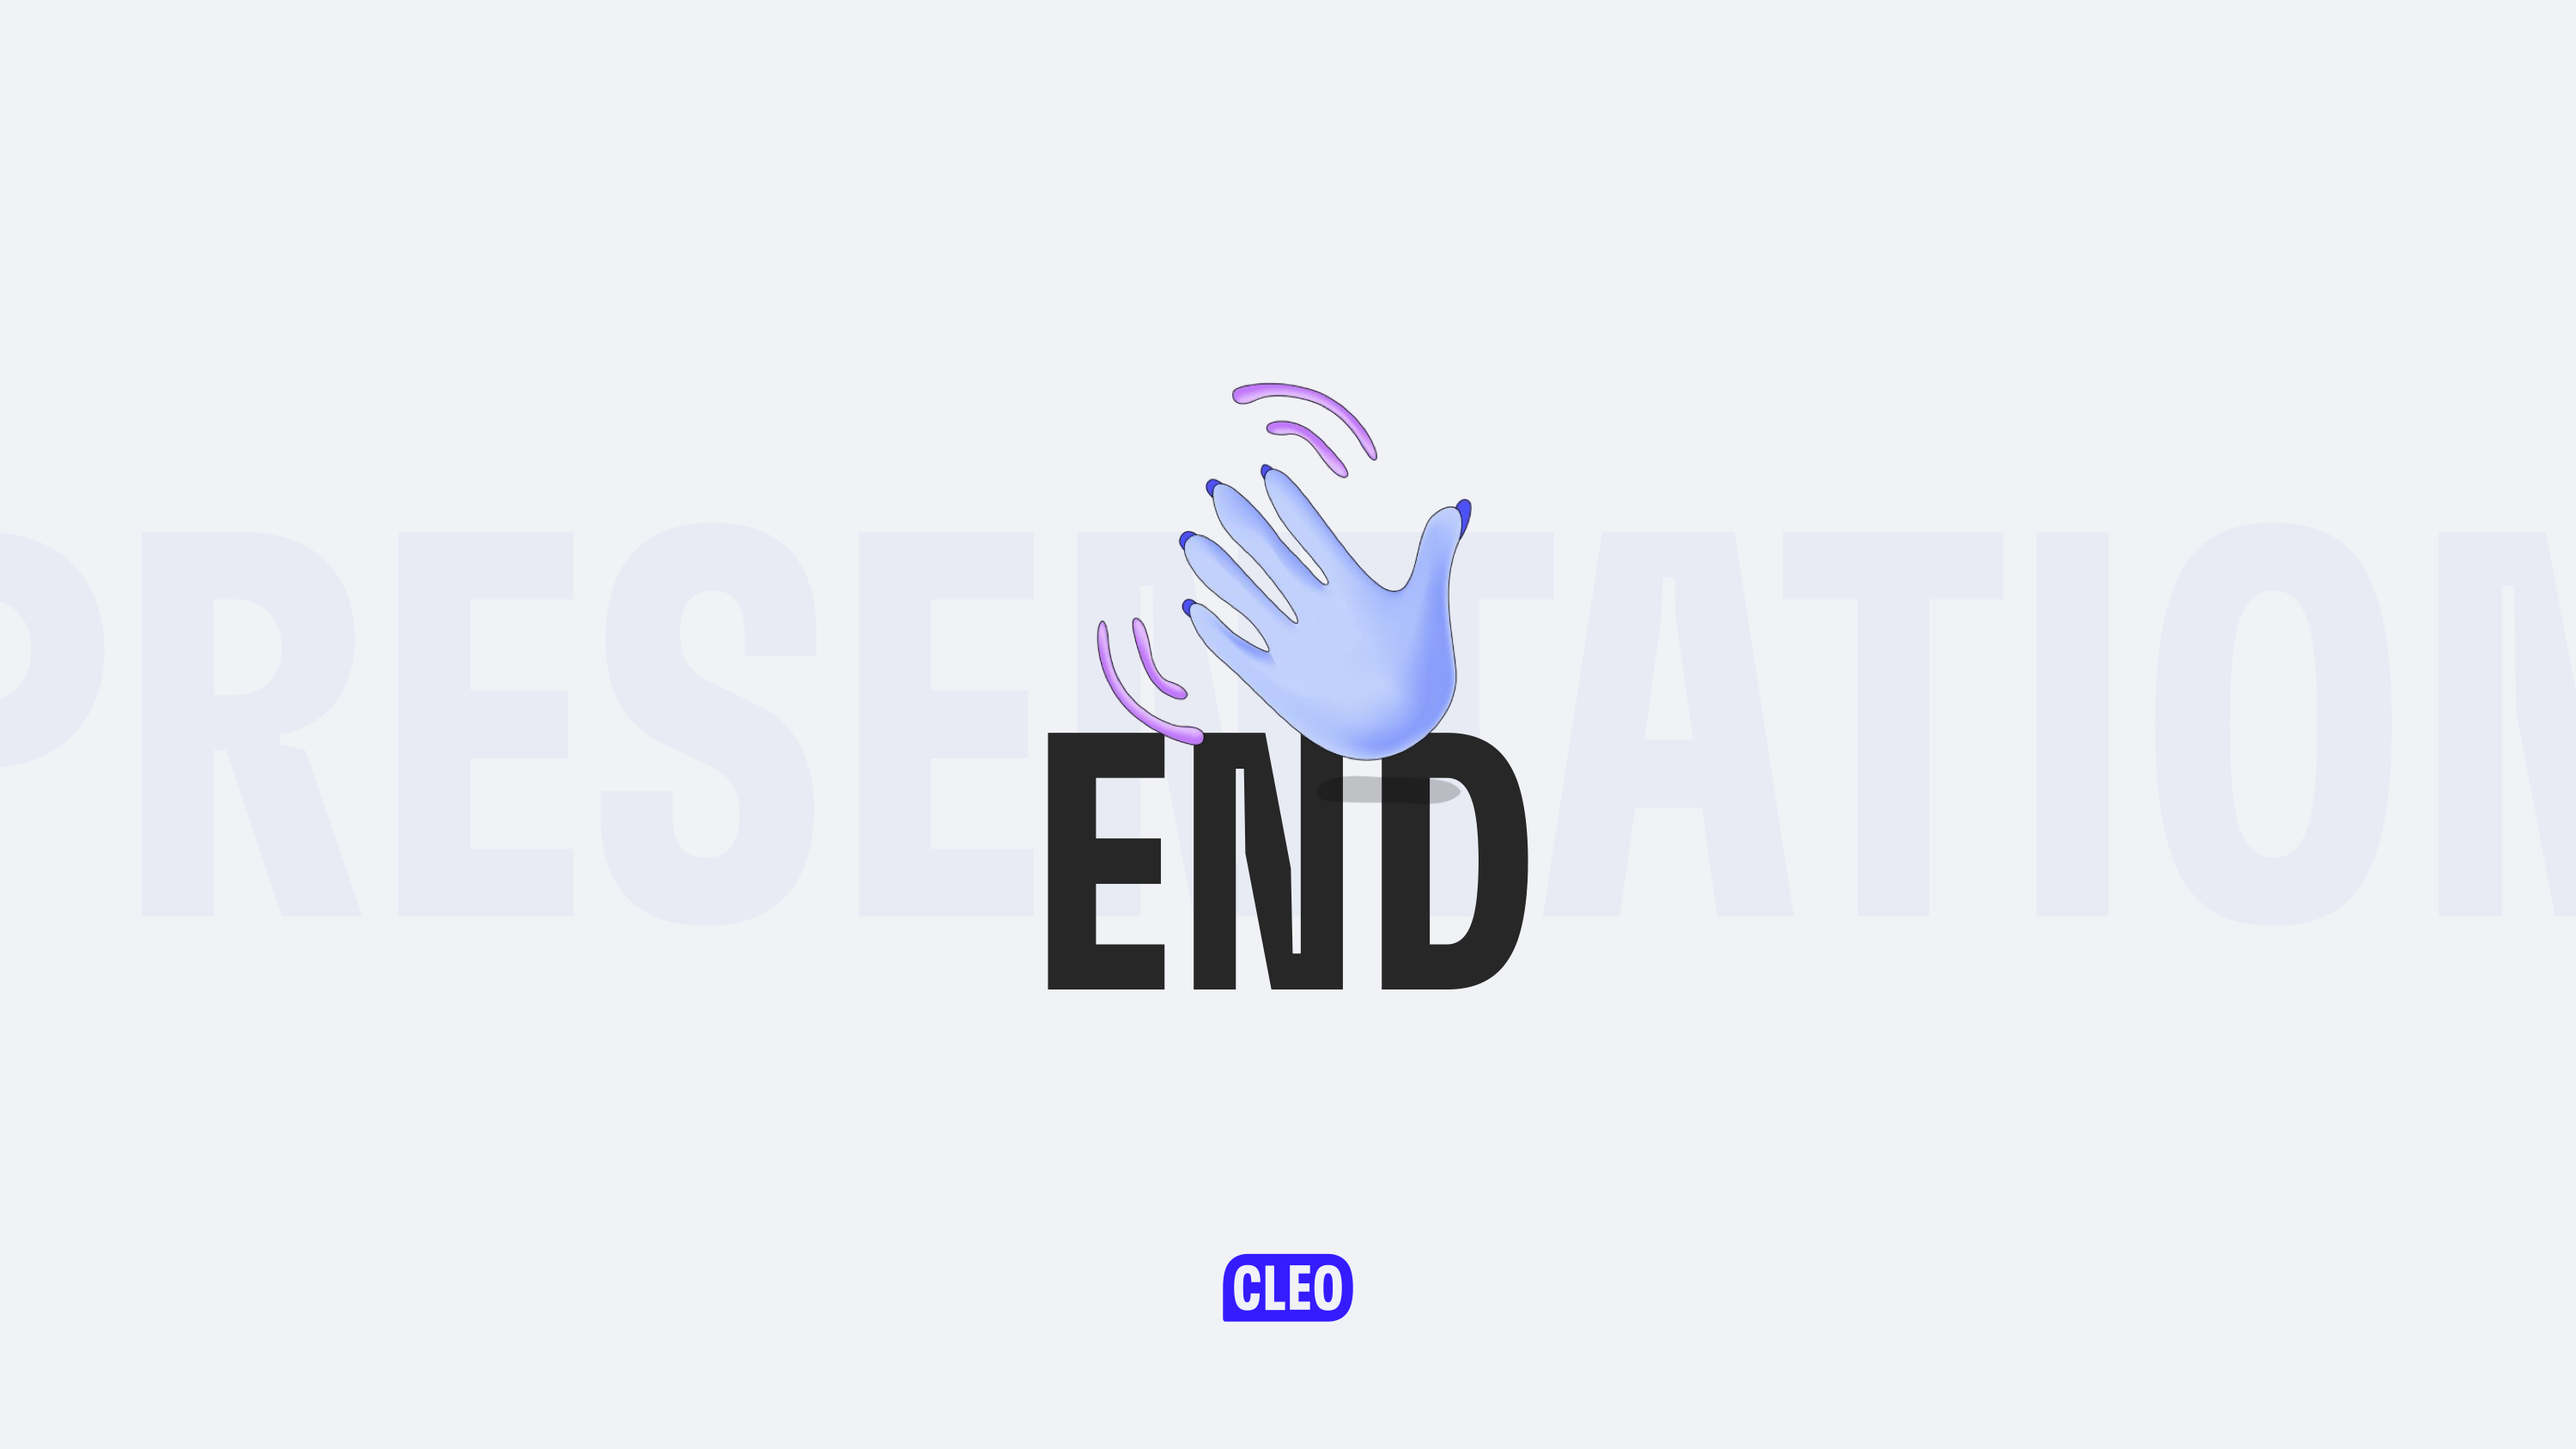 The final slide, it says End on it; a blue hand is waving; text: End